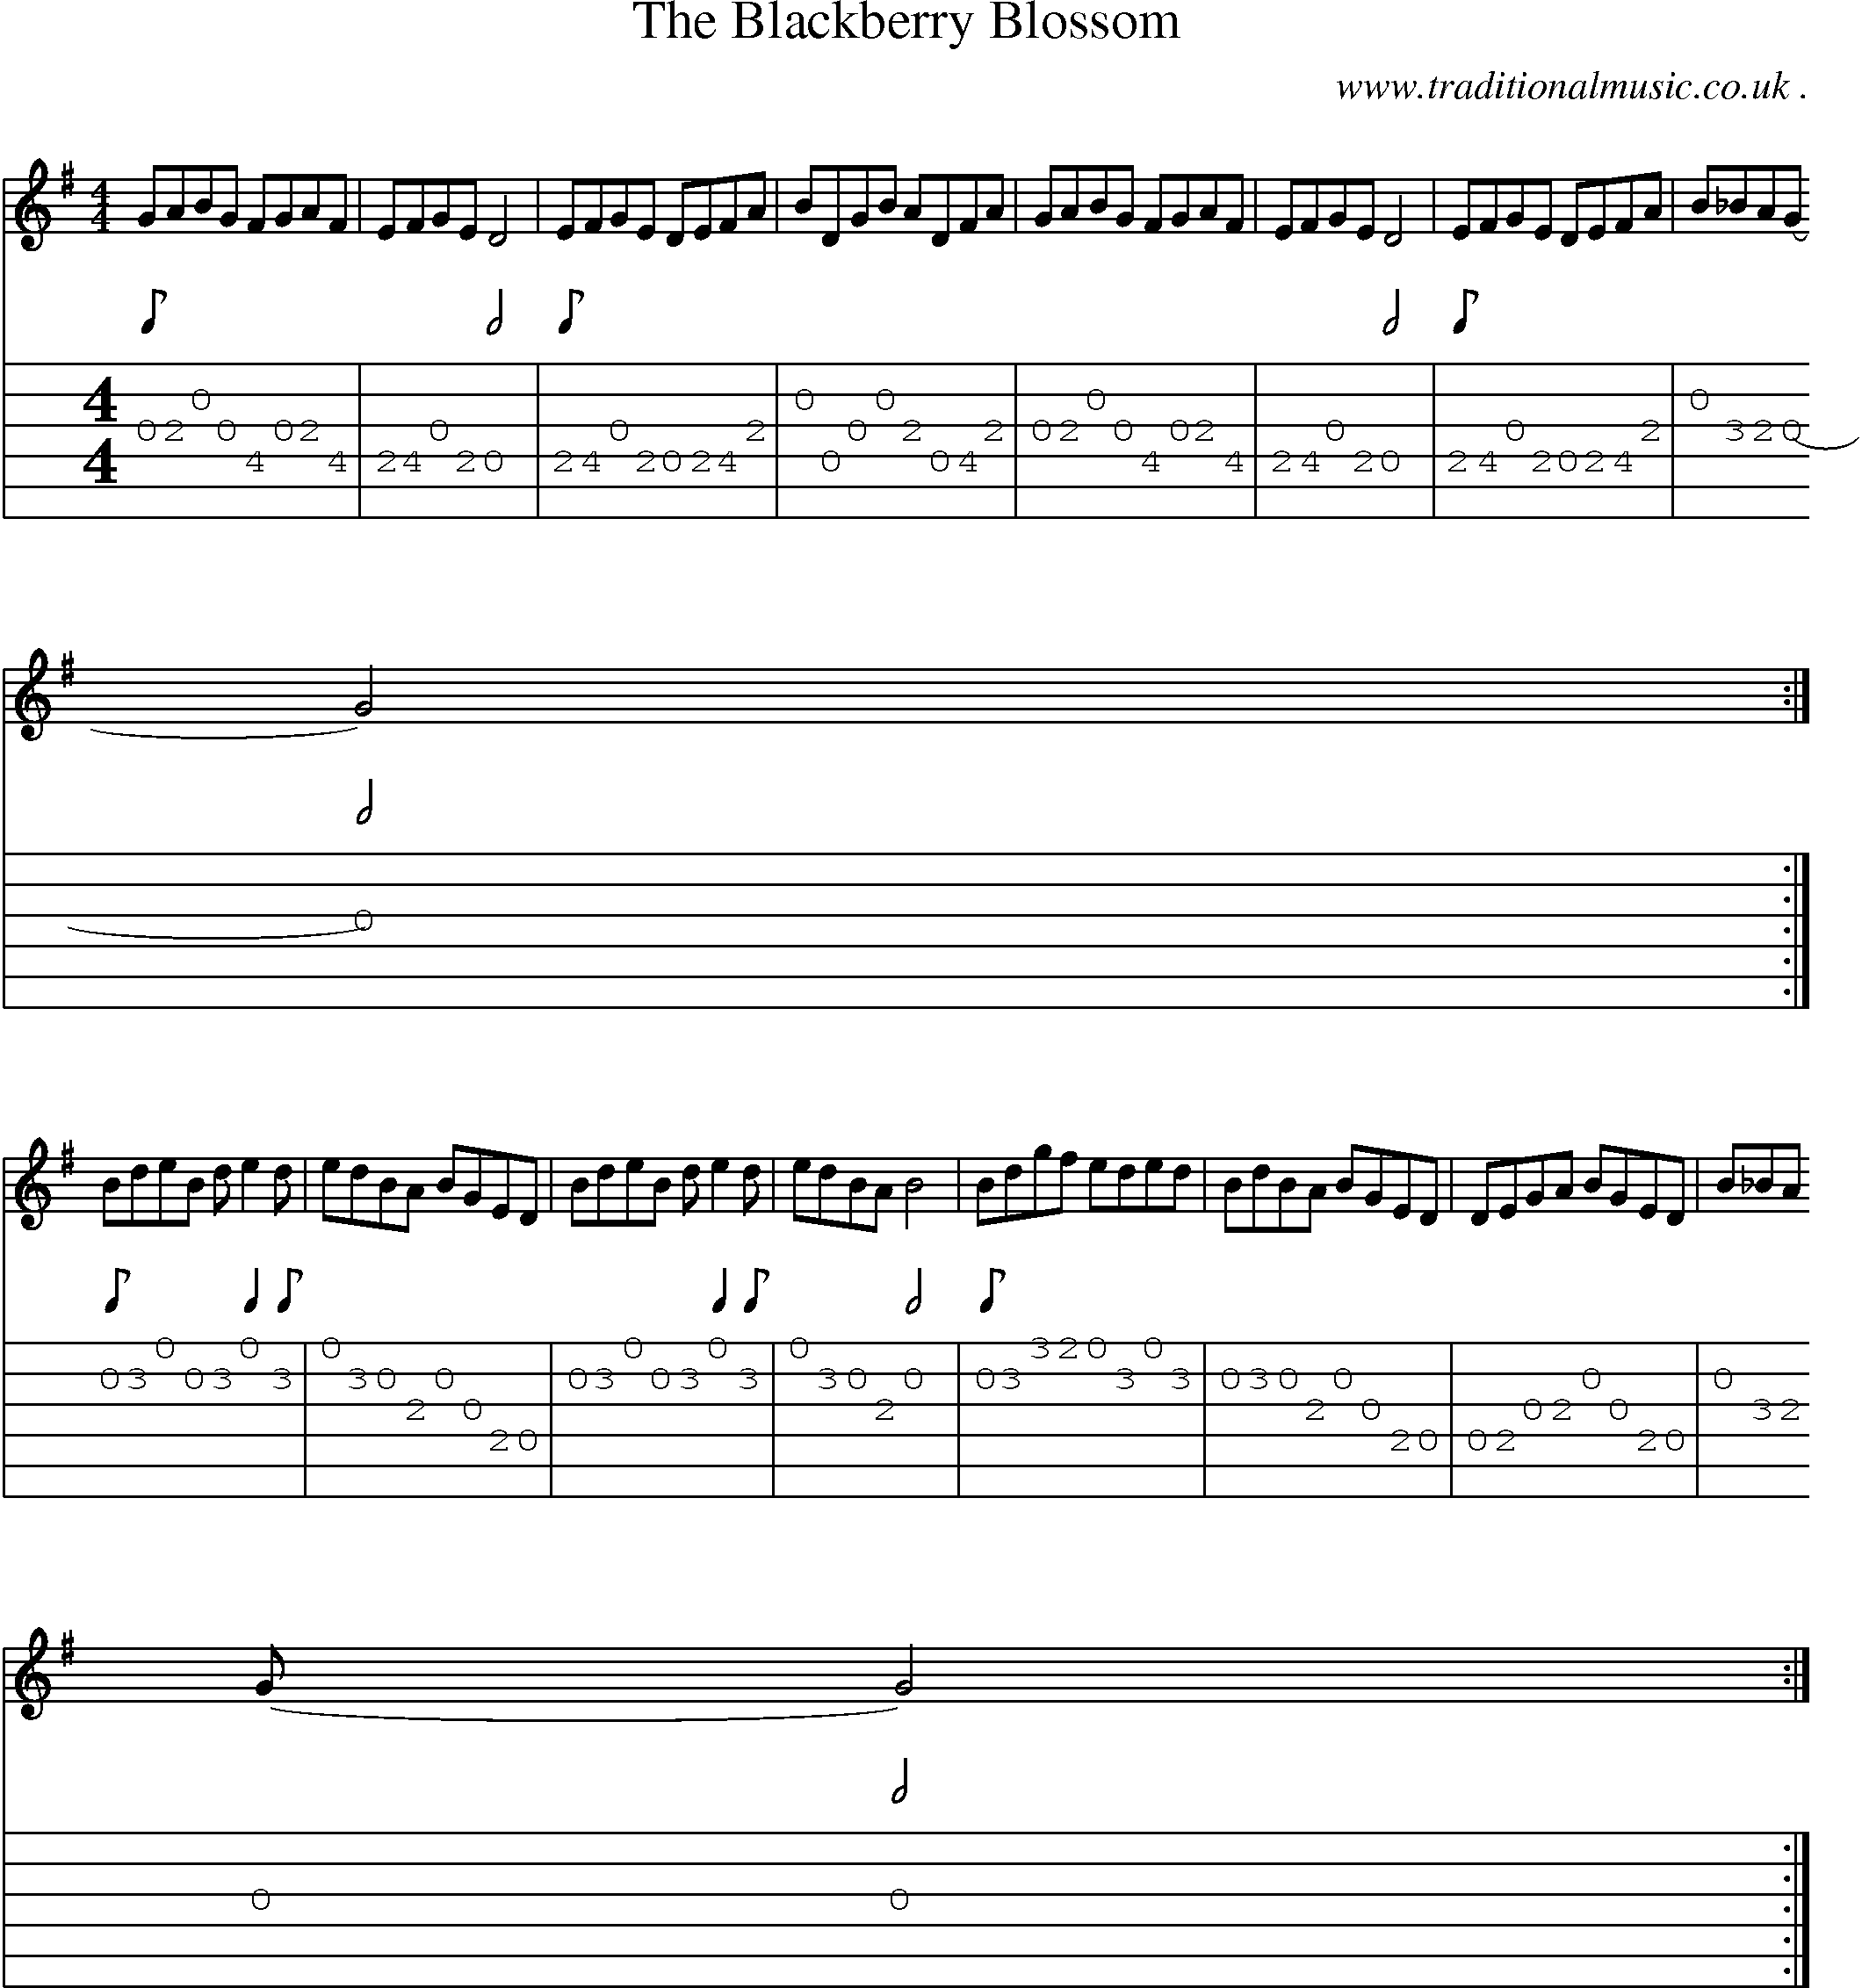 Sheet-Music and Guitar Tabs for The Blackberry Blossom